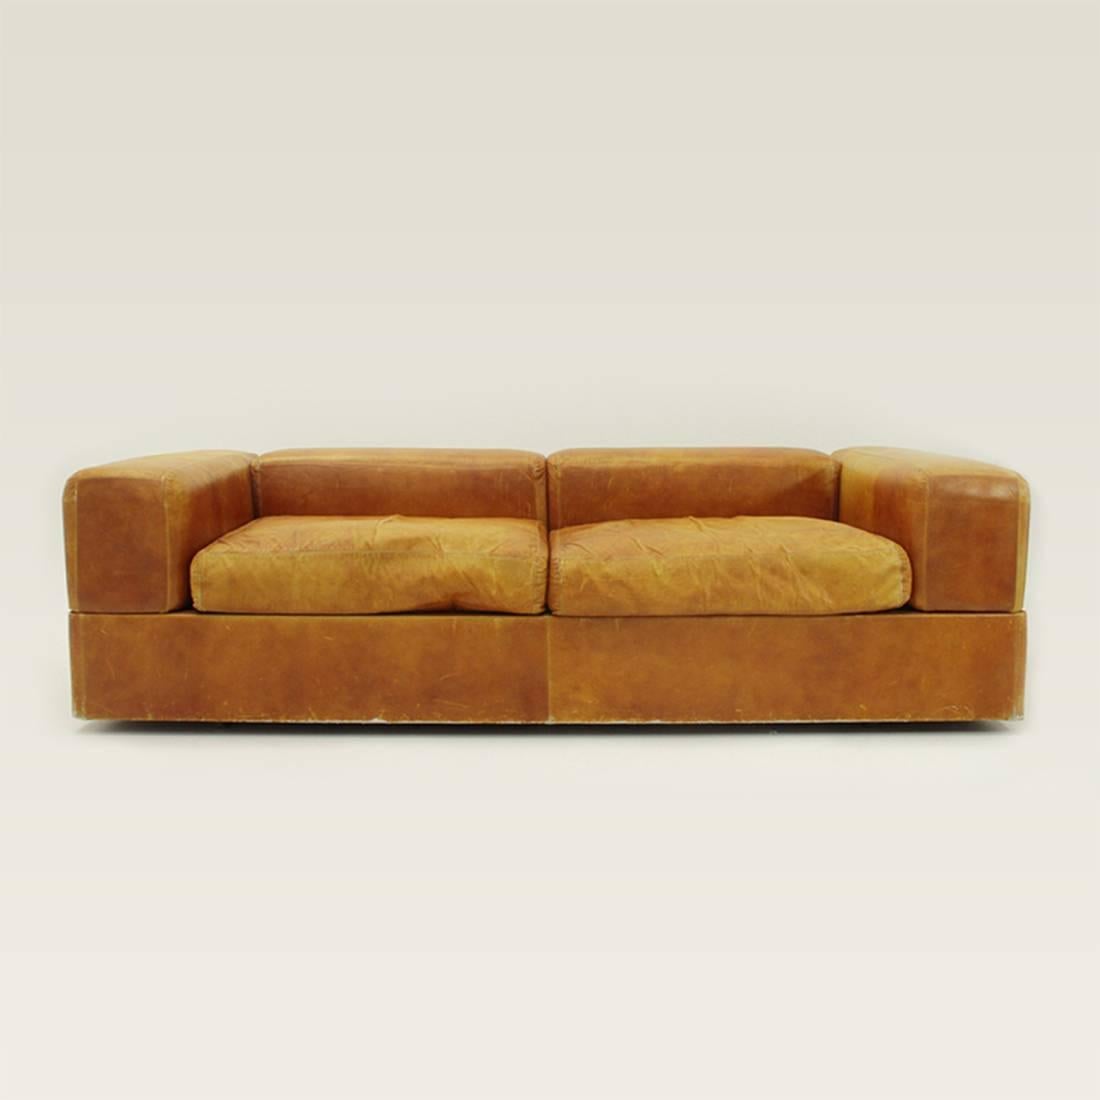 Sofa produced in the 1960s by Cinova based on a project by Tito Agnoli.
Wooden structure padded and lined in brown leather.
Folding armrests and backrests with white laminate top.
Support bars of the armrests and of the back in steel.
Metal bed